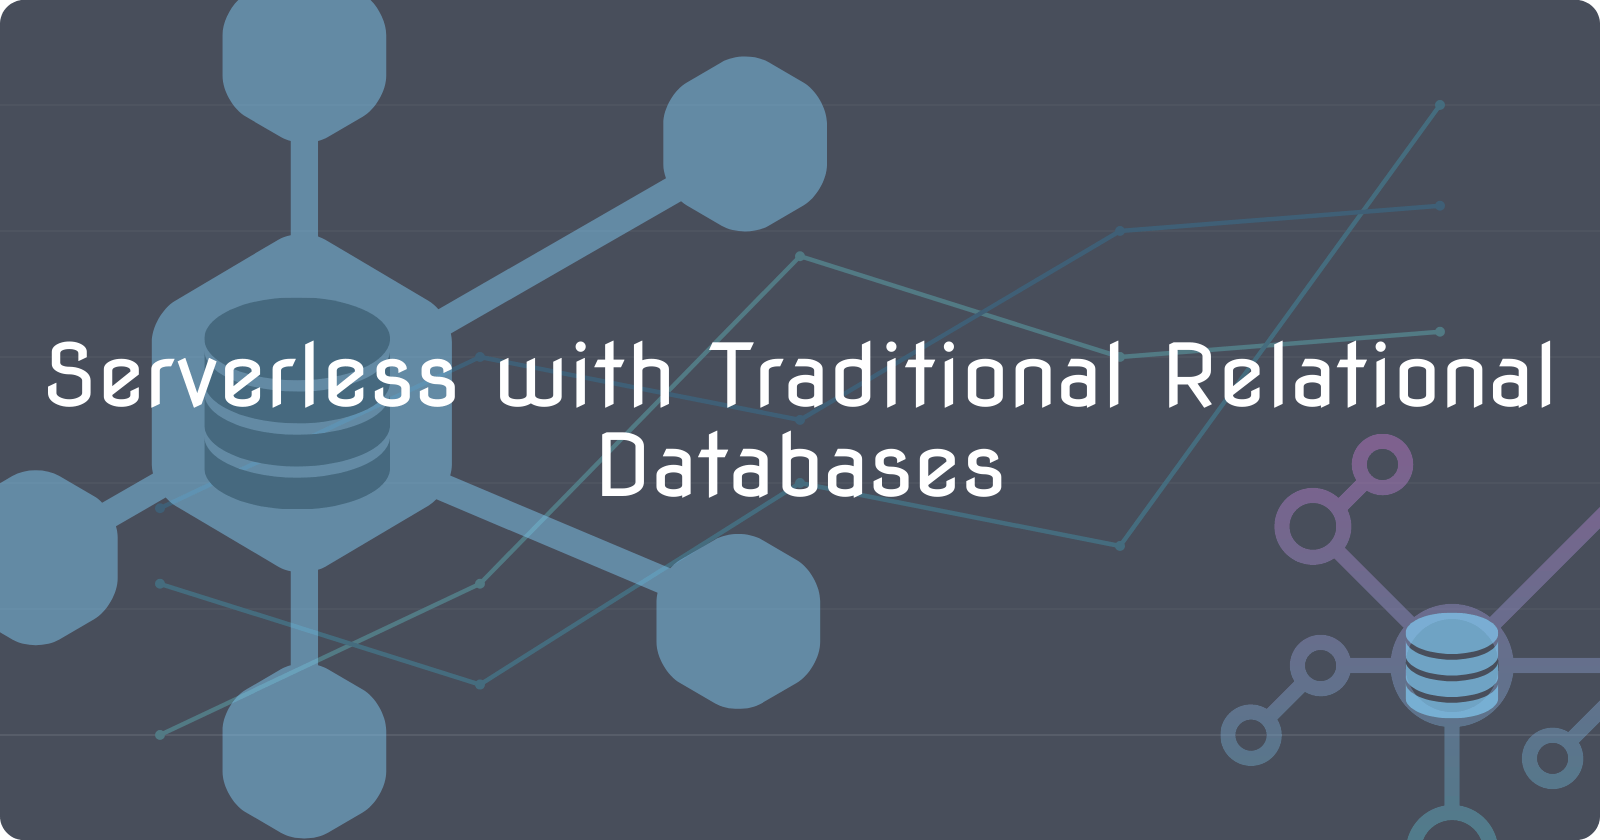 When Serverless Meets Traditional Relational Databases